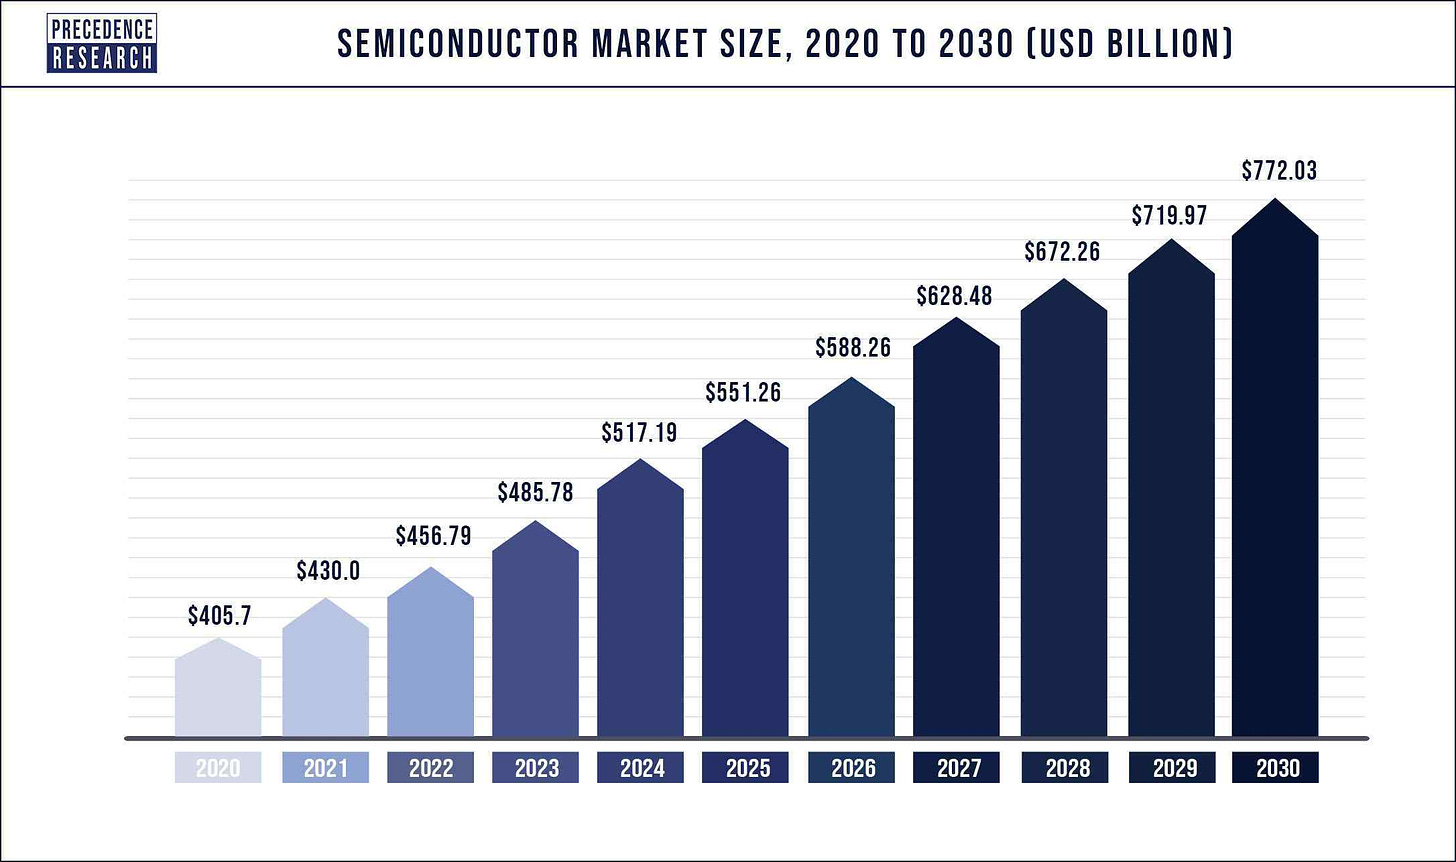 Semiconductor Market Size to Surpass USD 772.03 Billion by 2030